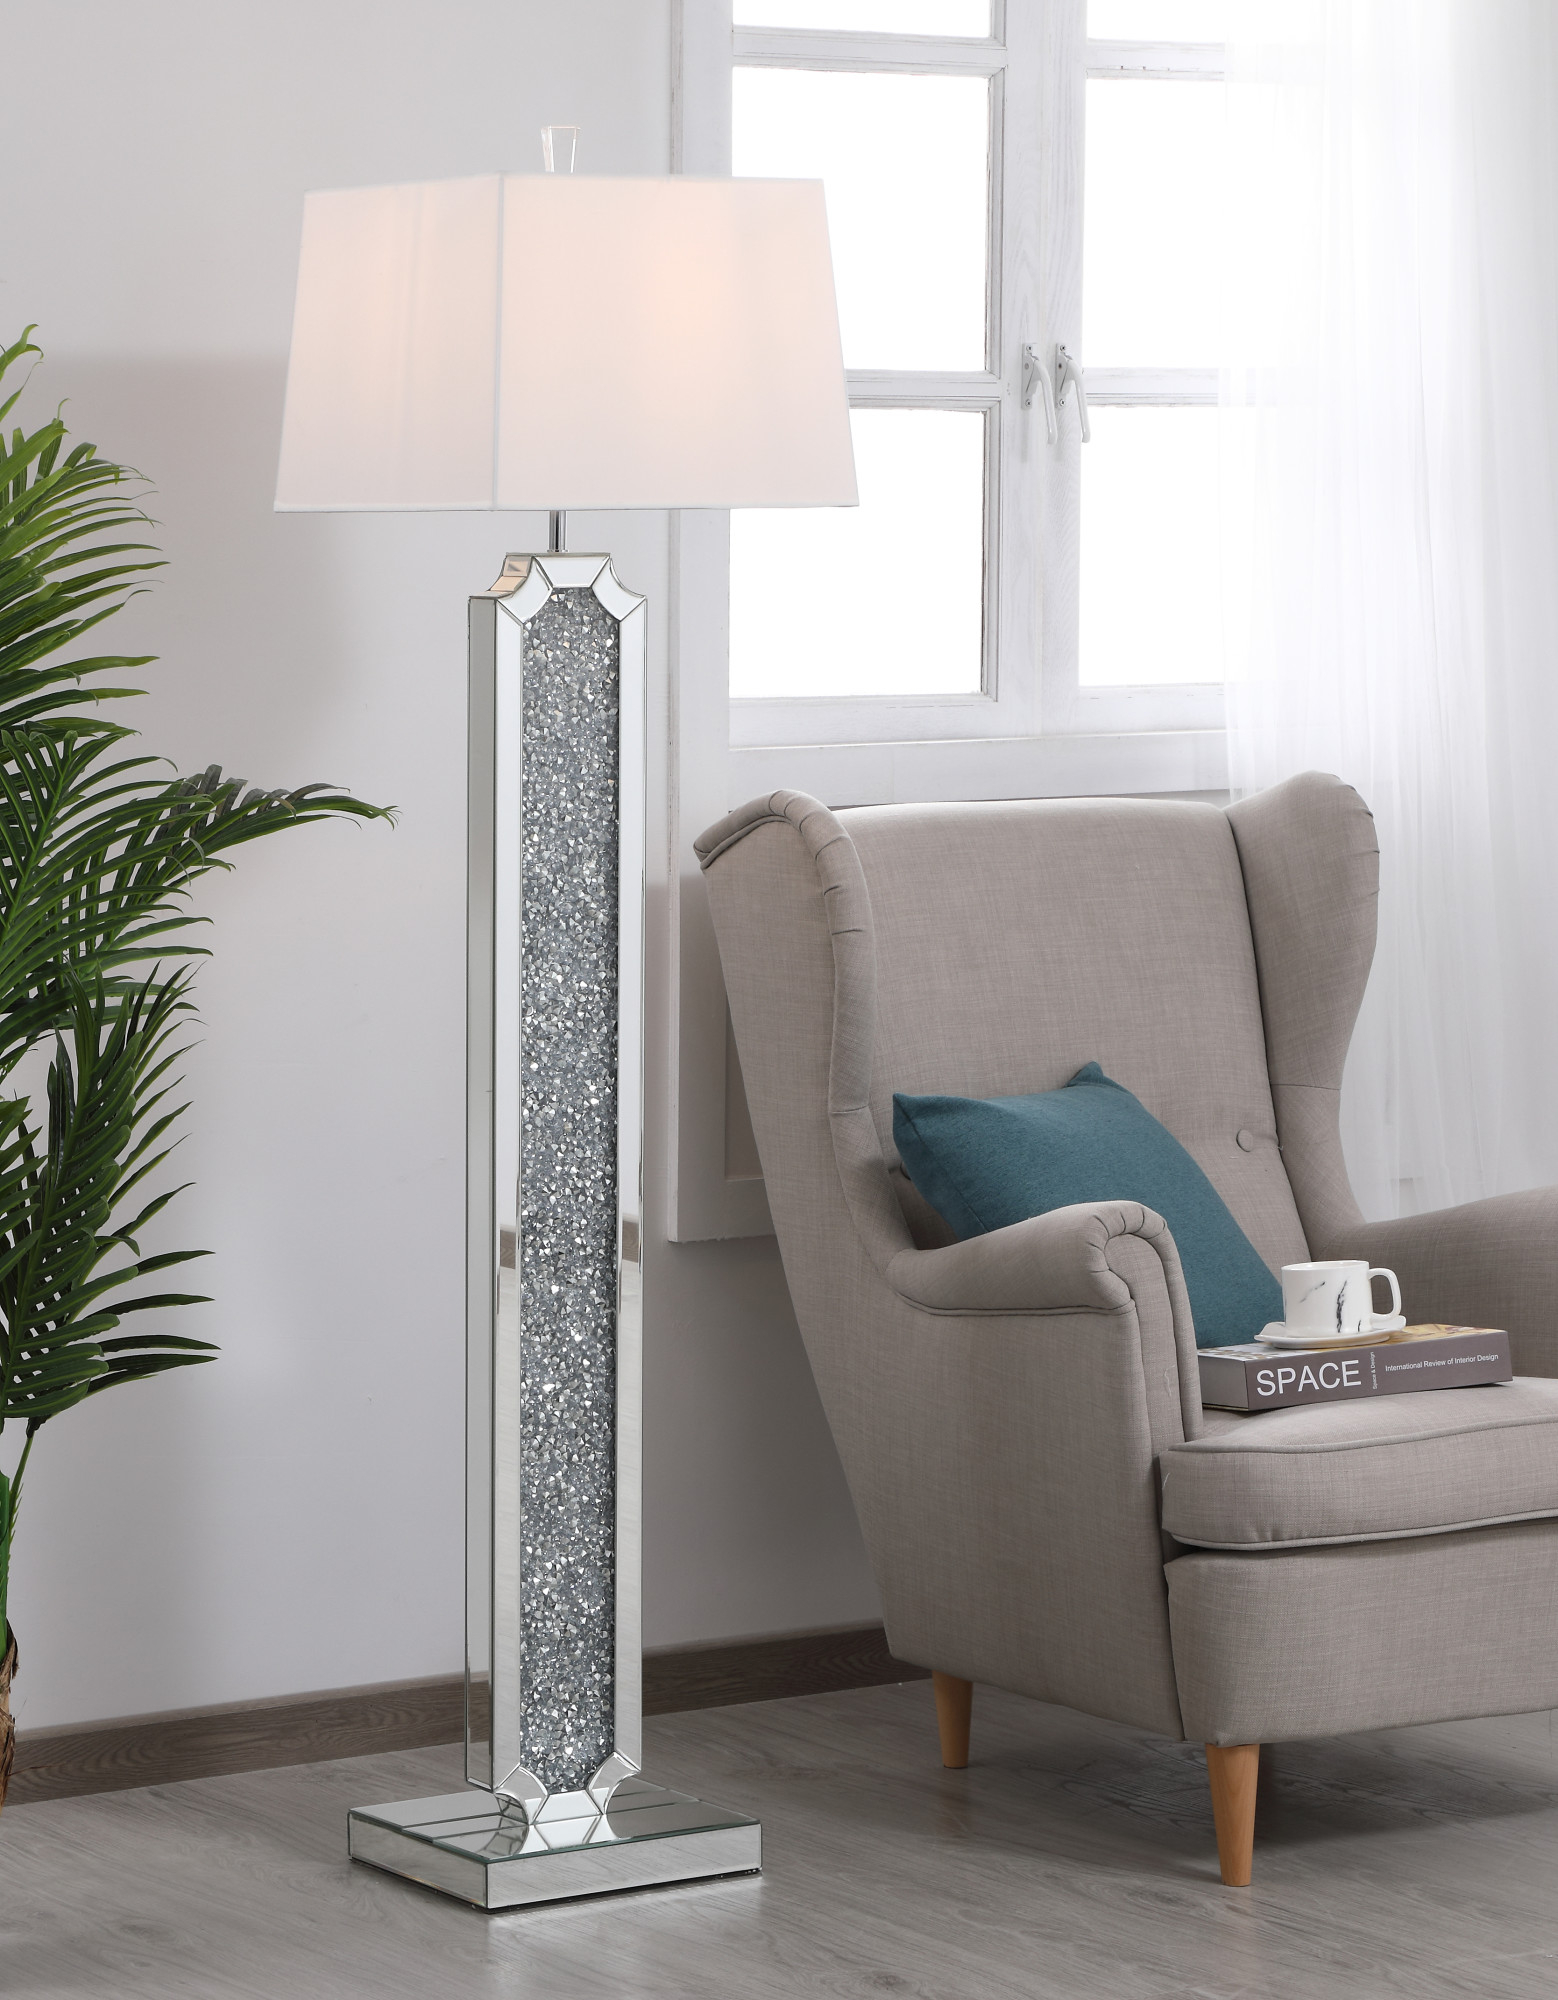 Details About Mirrored Floor Lamp Crystals White Shade Modern Living Room Bedroom 1 Light 62 within sizing 1558 X 2000